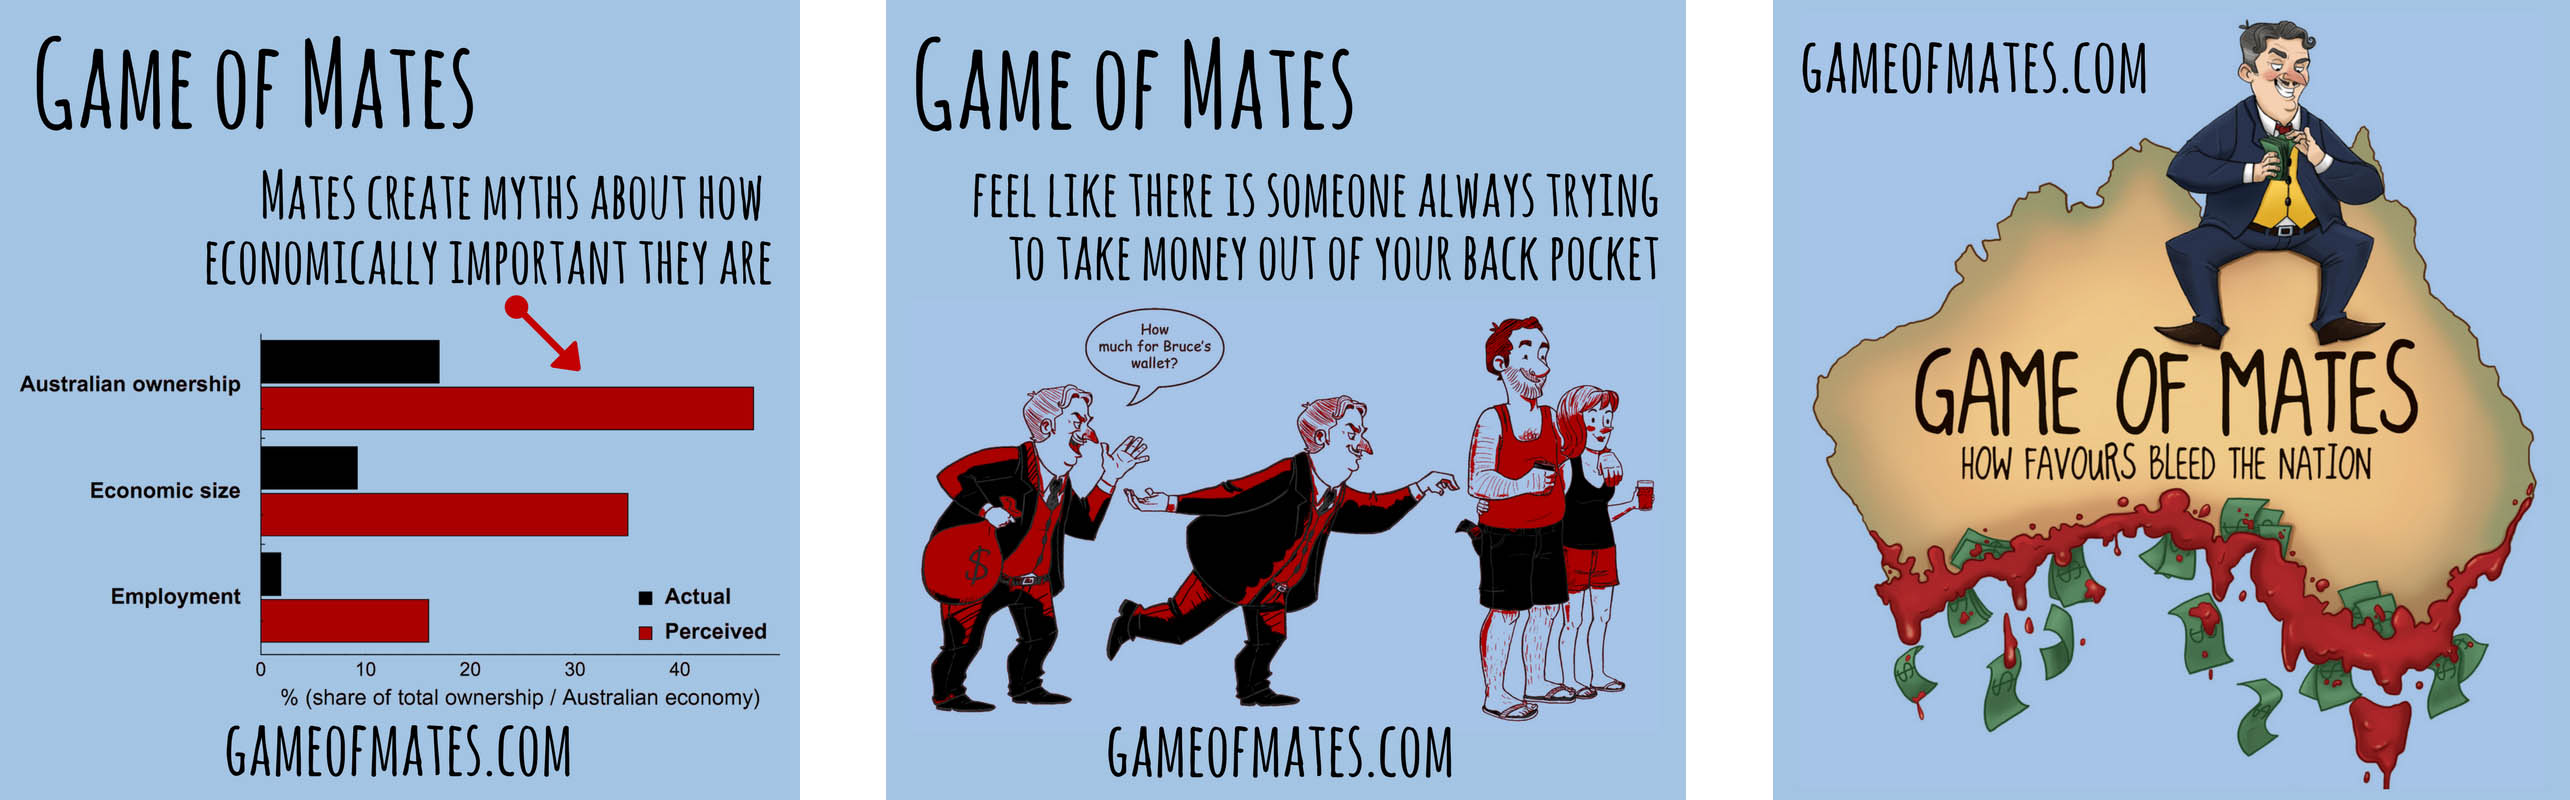  ‘Game of Mates’ – How favours bleed the nation’